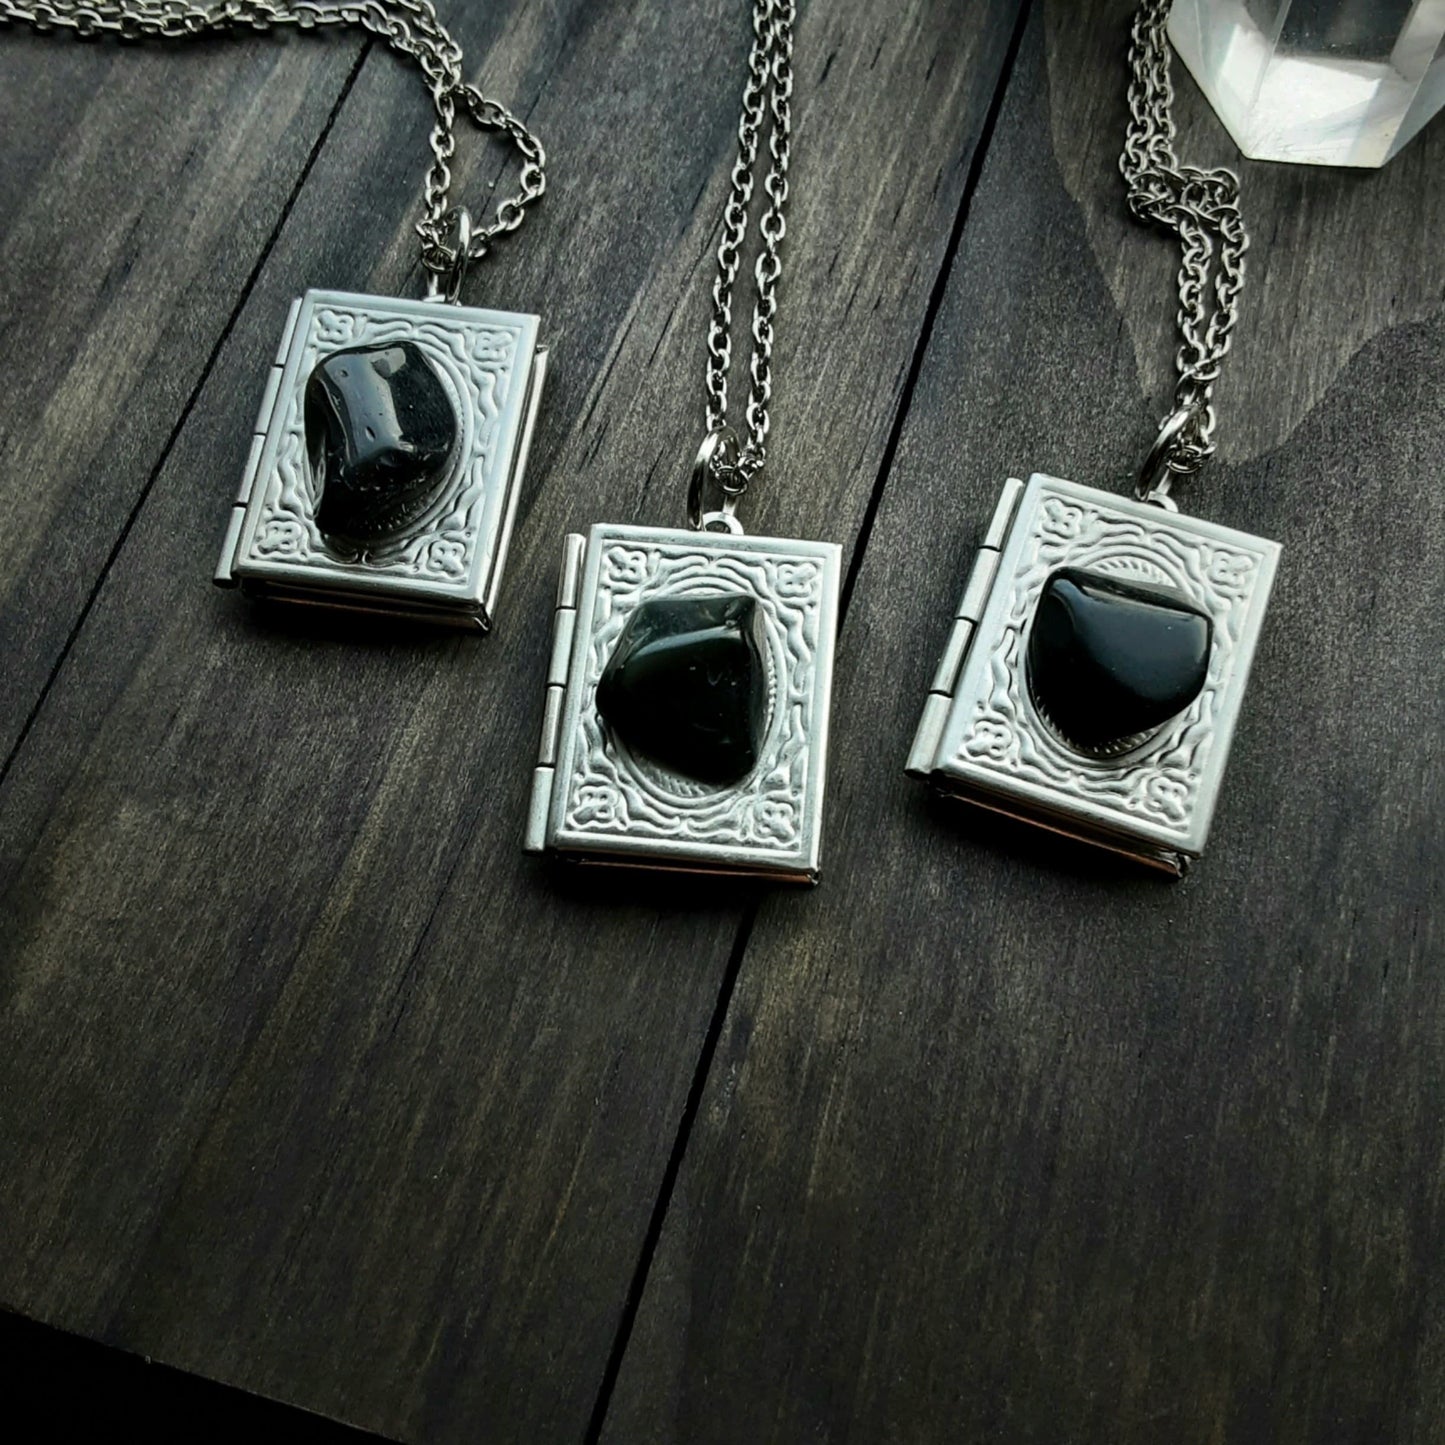 Book locket with Obsidian for Protection, Dark Academia necklace with long or short chain, layering necklace, Protection Magic